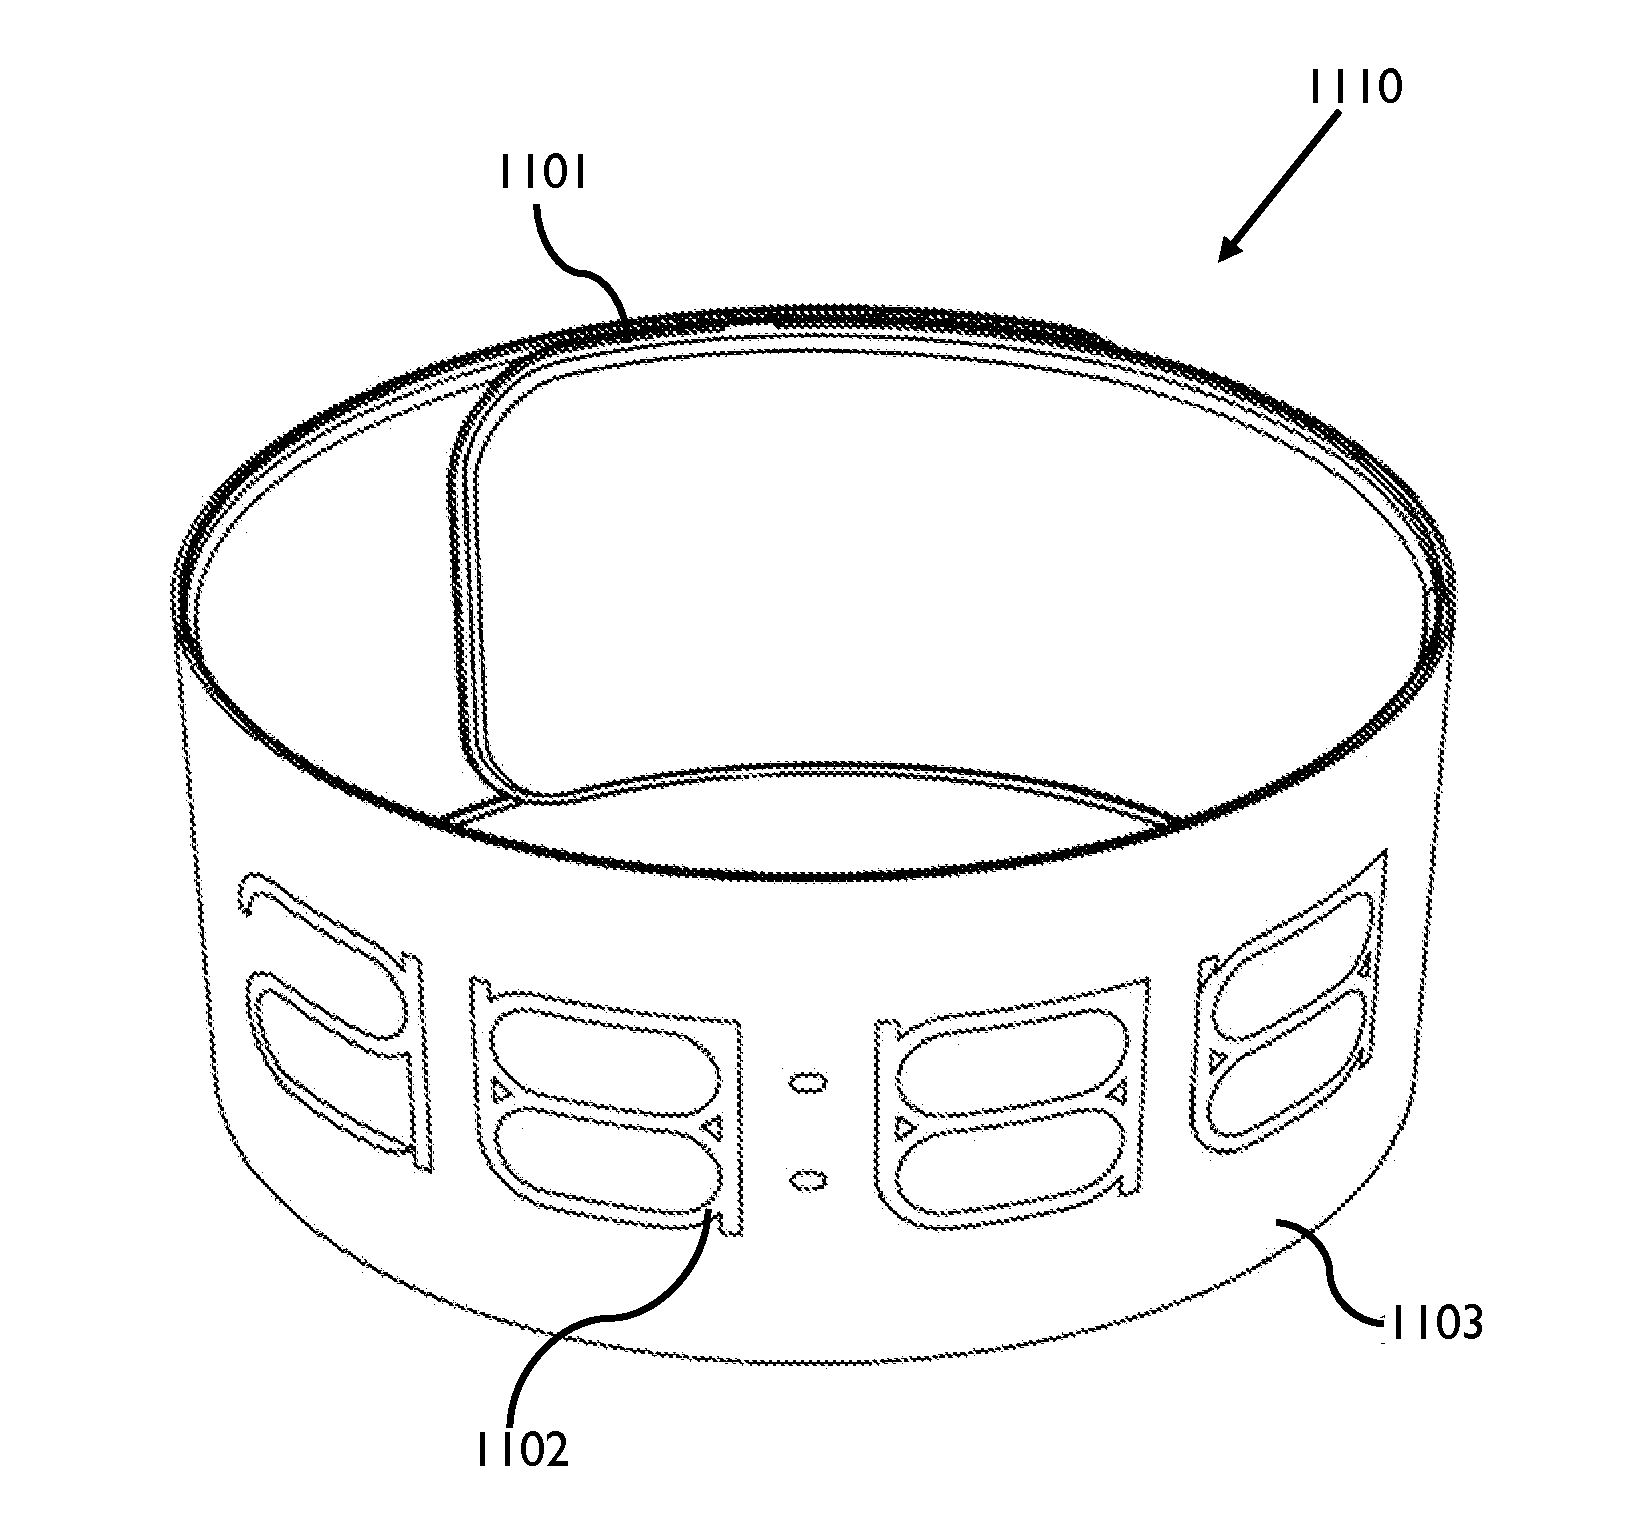 Flexible wristwatch with segmented e-paper display